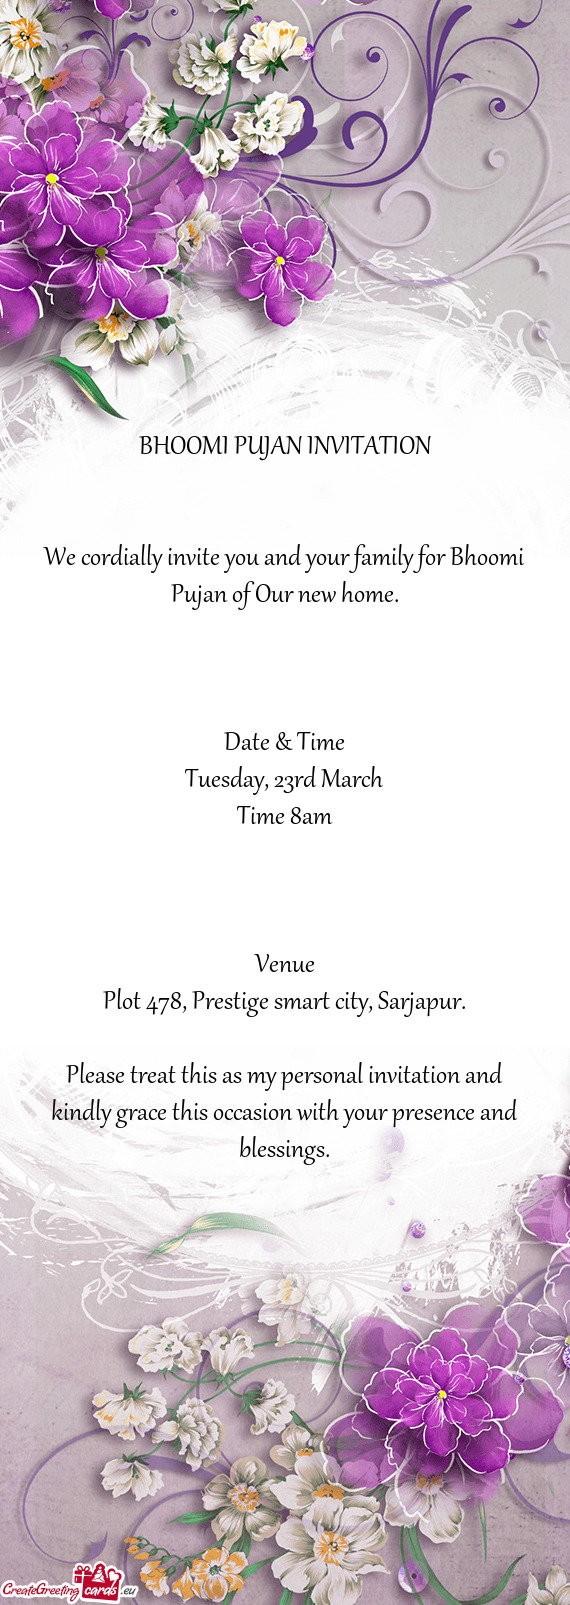 We cordially invite you and your family for Bhoomi Pujan of Our new home